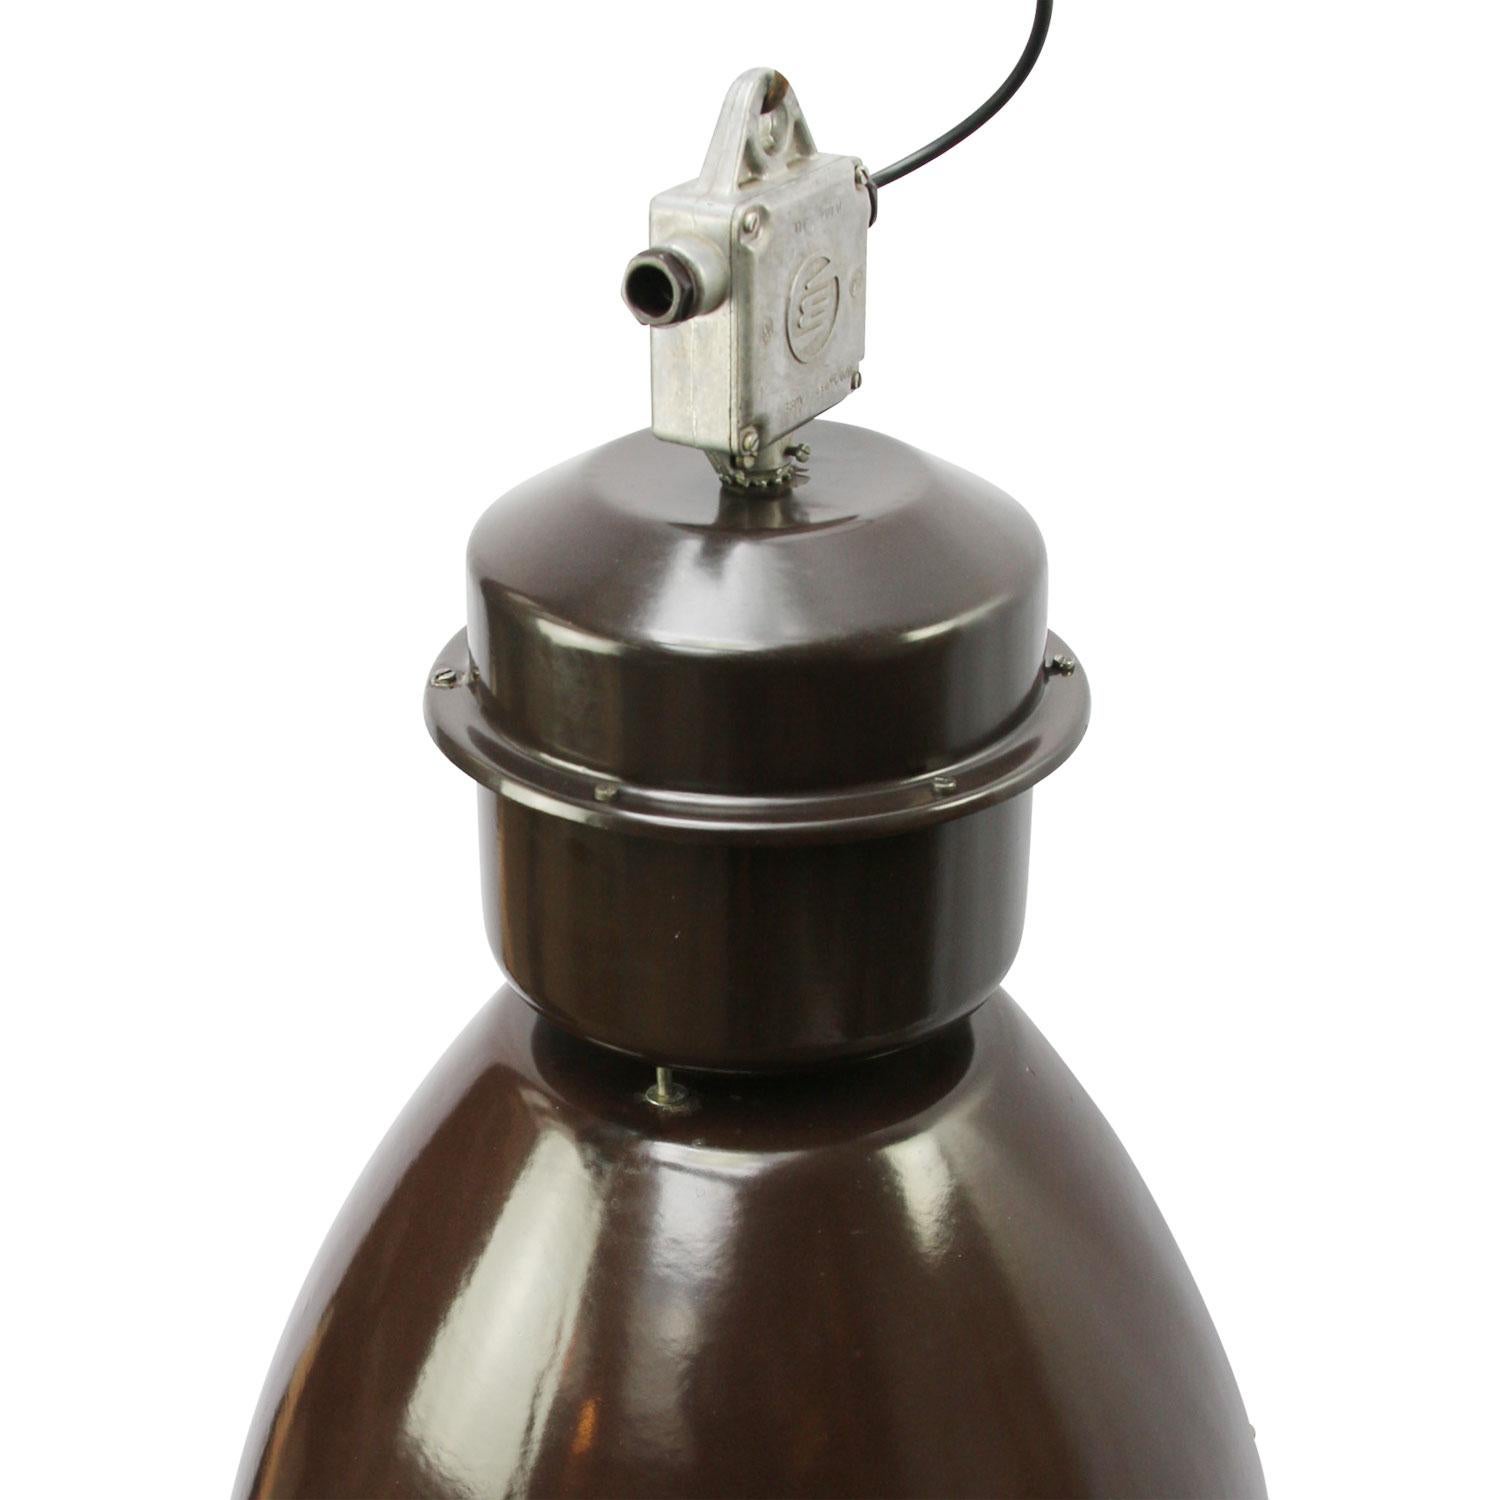 Very large industrial lamp. Dark brown enamel. White interior.

Weight: 7.5 kg / 16.5 lb

All lamps have been made suitable by international standards for incandescent light bulbs, energy-efficient and LED bulbs. Max 150W. 100% safe. They can be